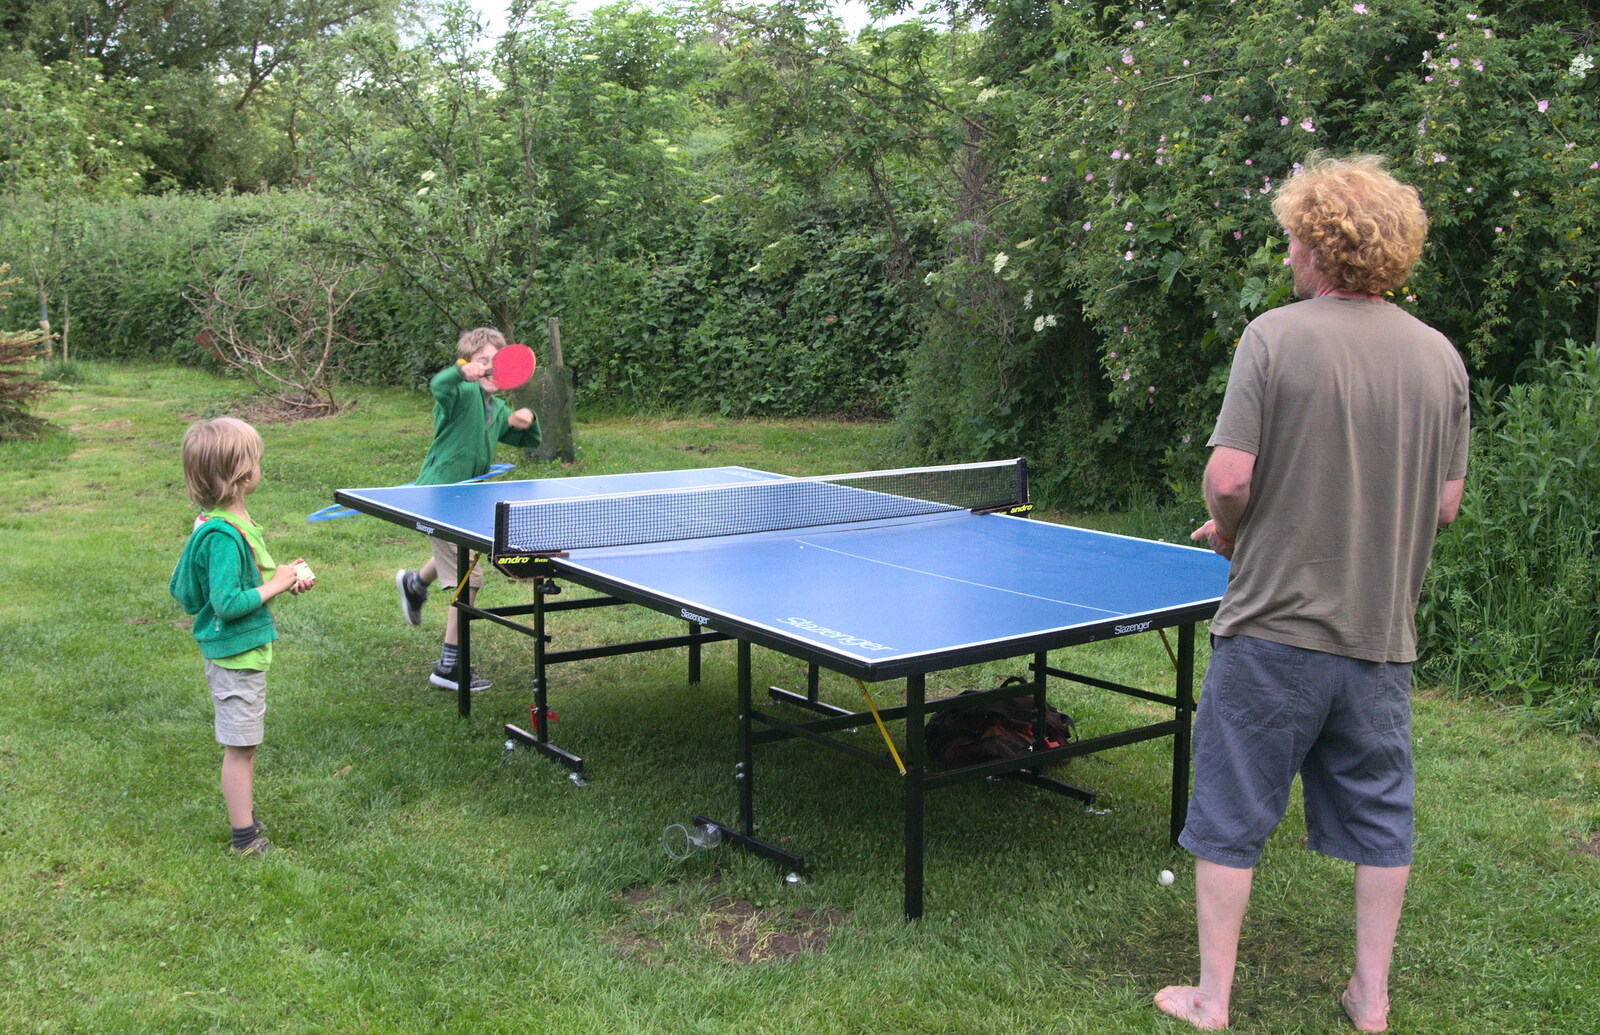 Fred plays table tennis with Wavy from Wavy and Martina's Combined Birthdays, Thrandeston, Suffolk - 27th May 2017